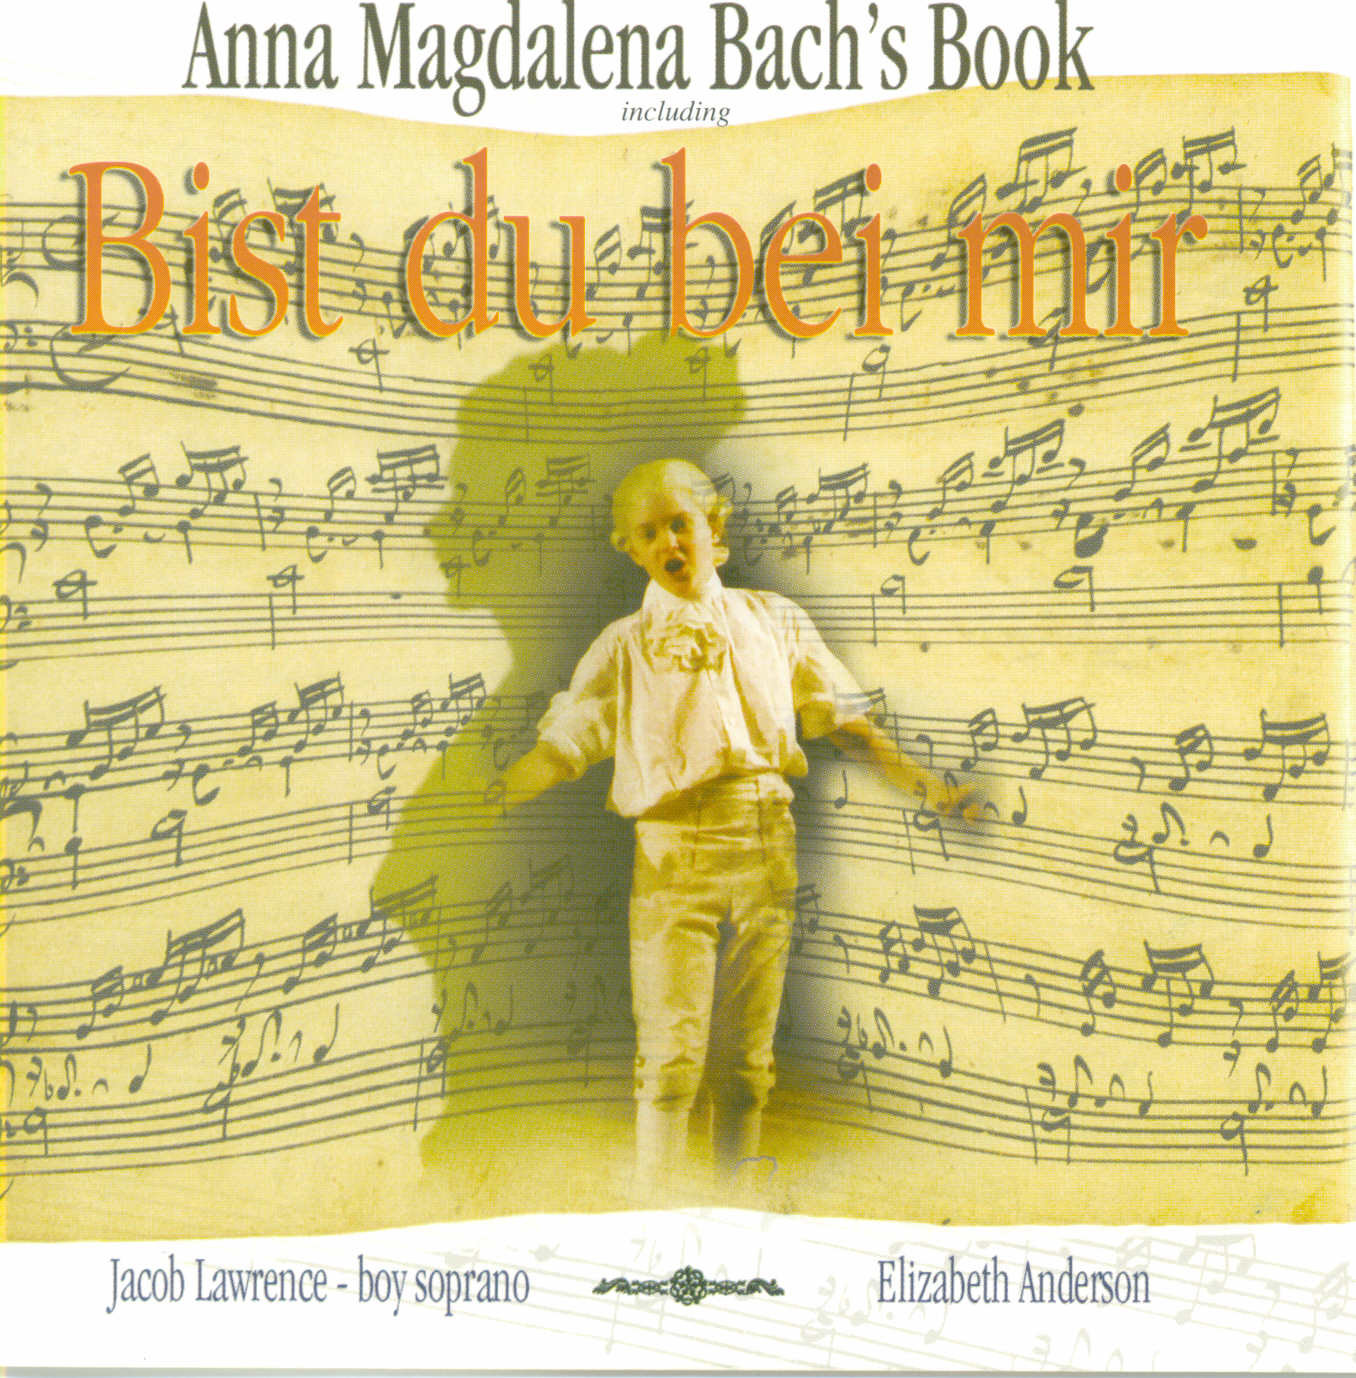 Anderson's set of Anna Magdalena's Book